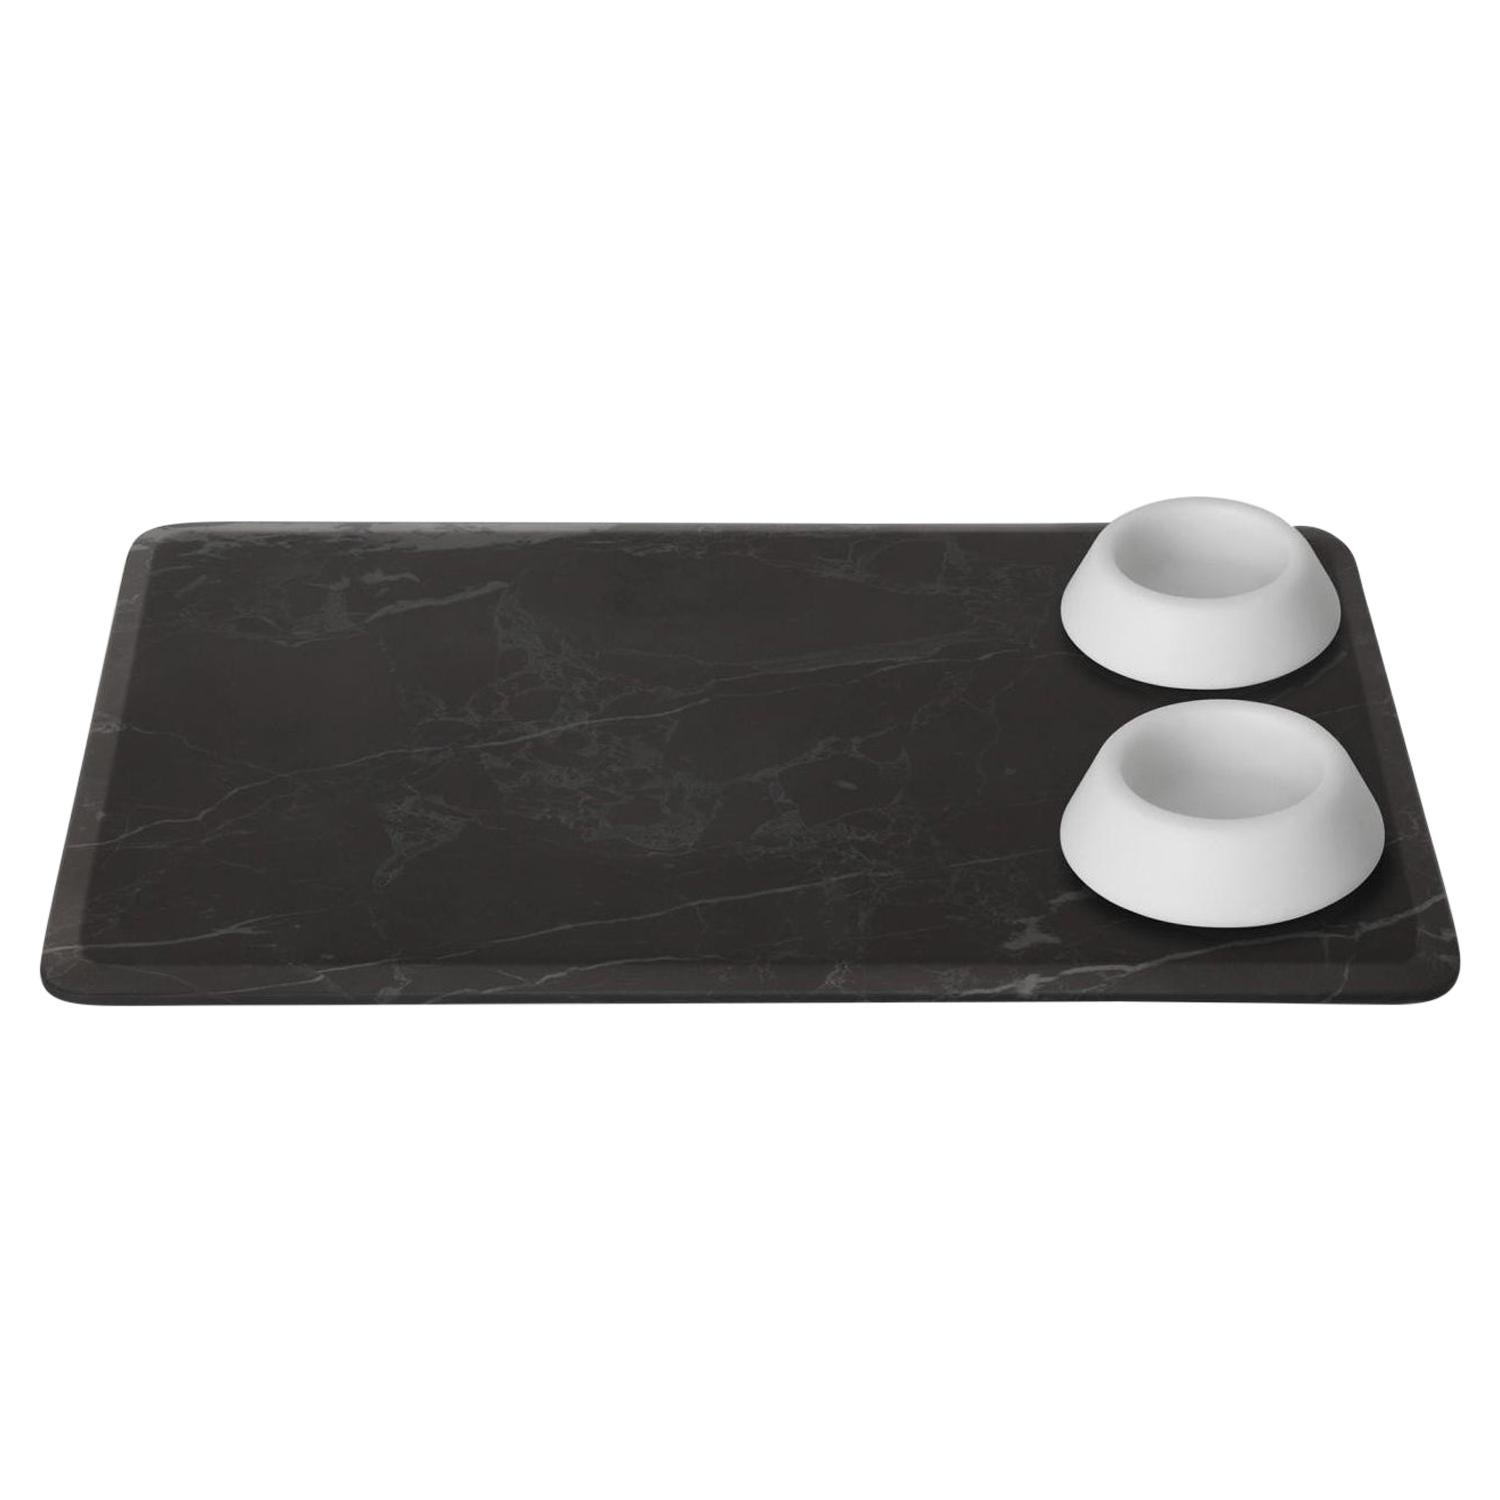 New Modern Serving Platter with Bowls in Marble Creator Ivan Colominas Stock